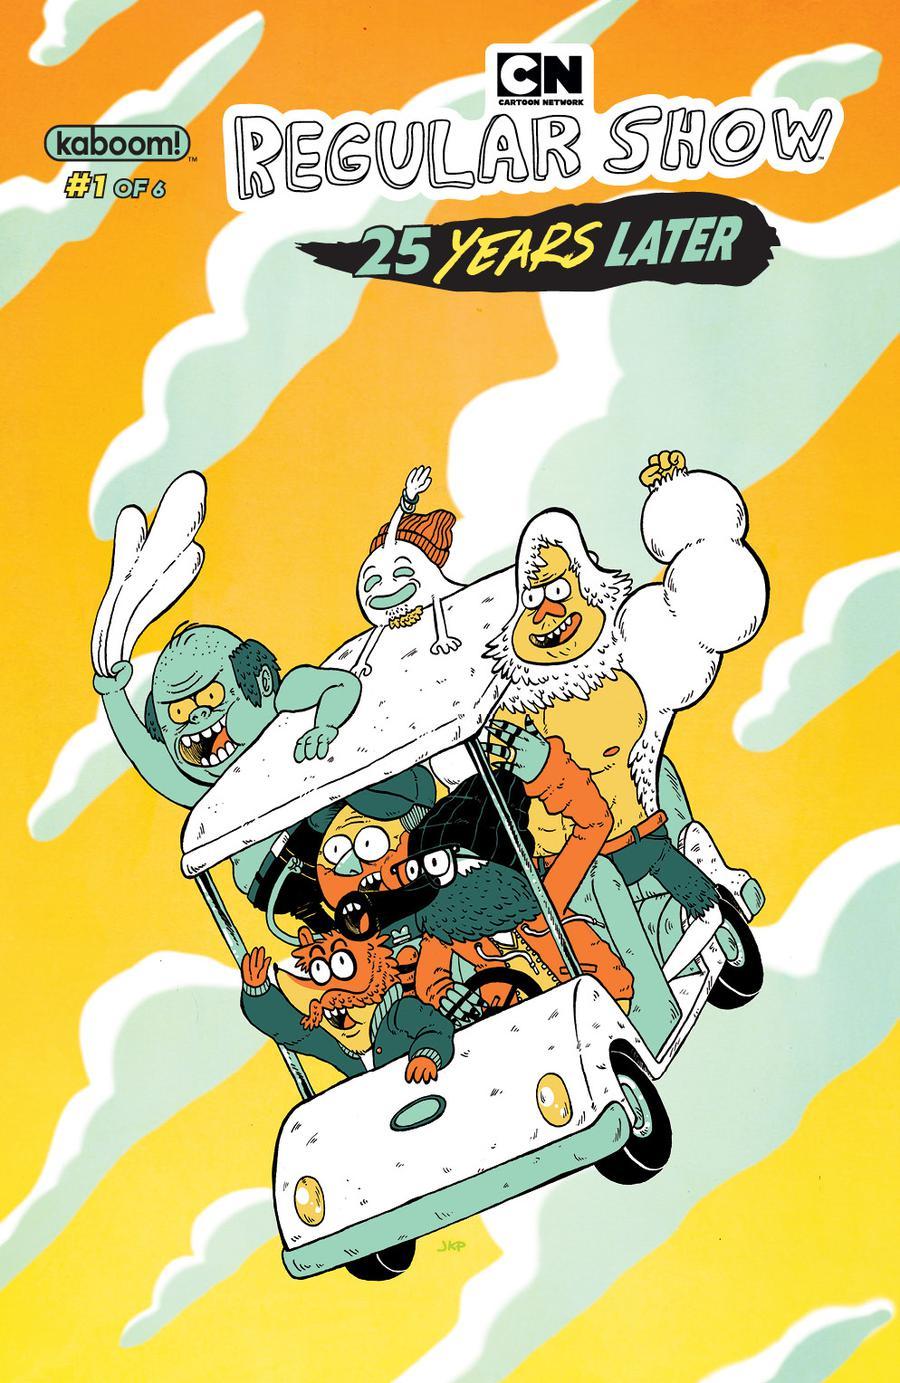 Regular Show 25 Years Later Vol. 1 #1